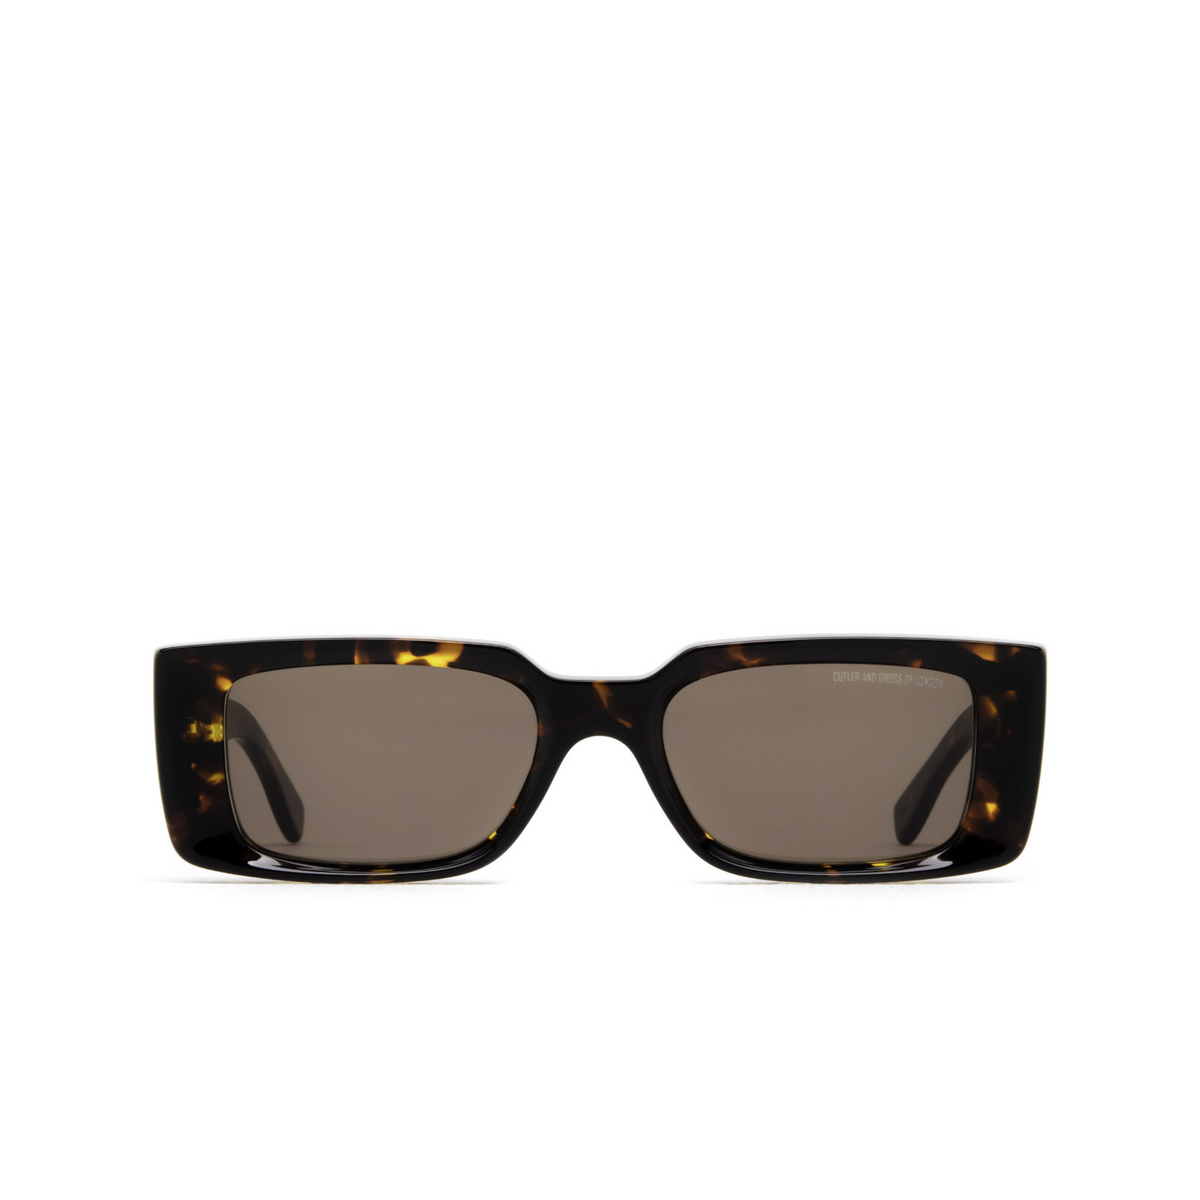 Cutler and Gross 1368 Sunglasses 04 Sticky Toffee - front view